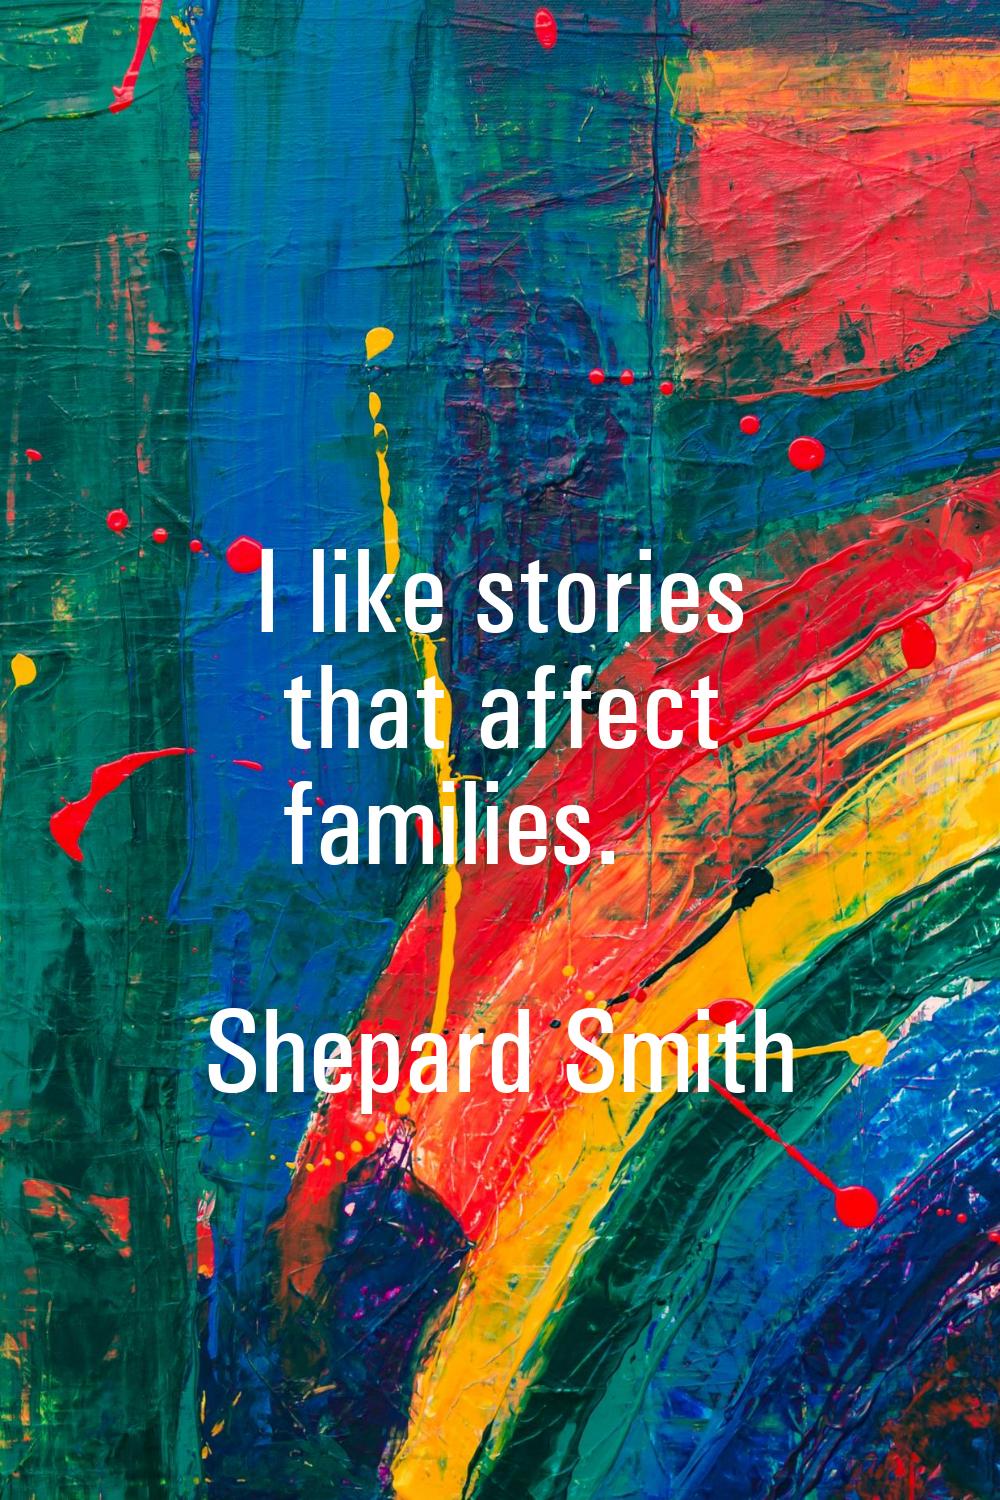 I like stories that affect families.